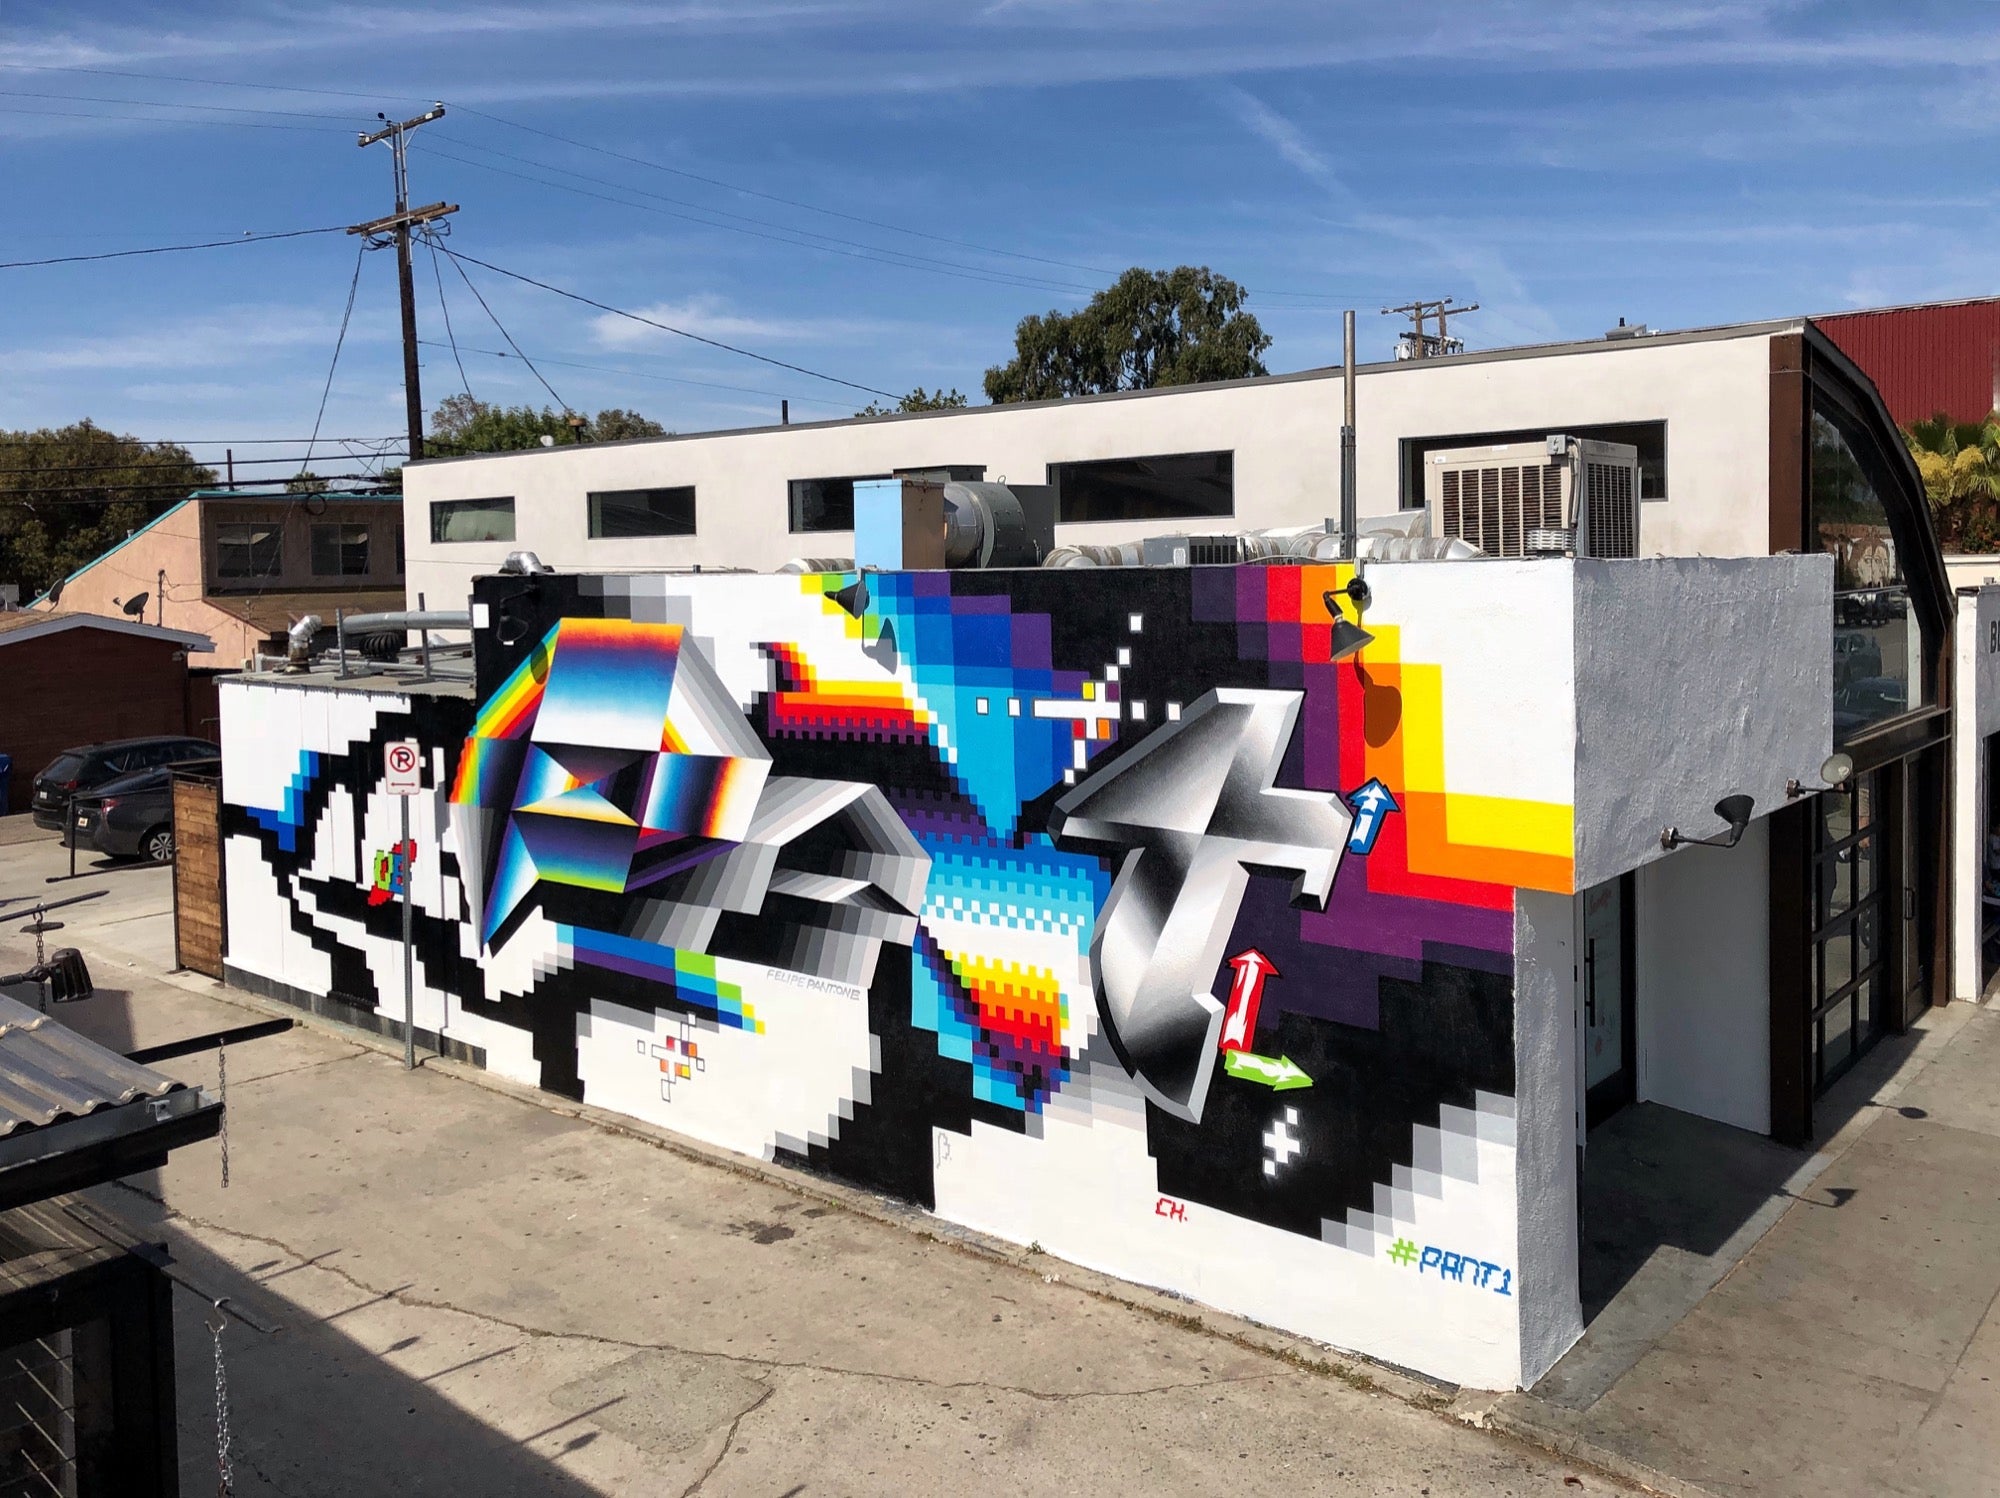 How Felipe Pantone Developed his Unique Tripped Out Graffiti Style